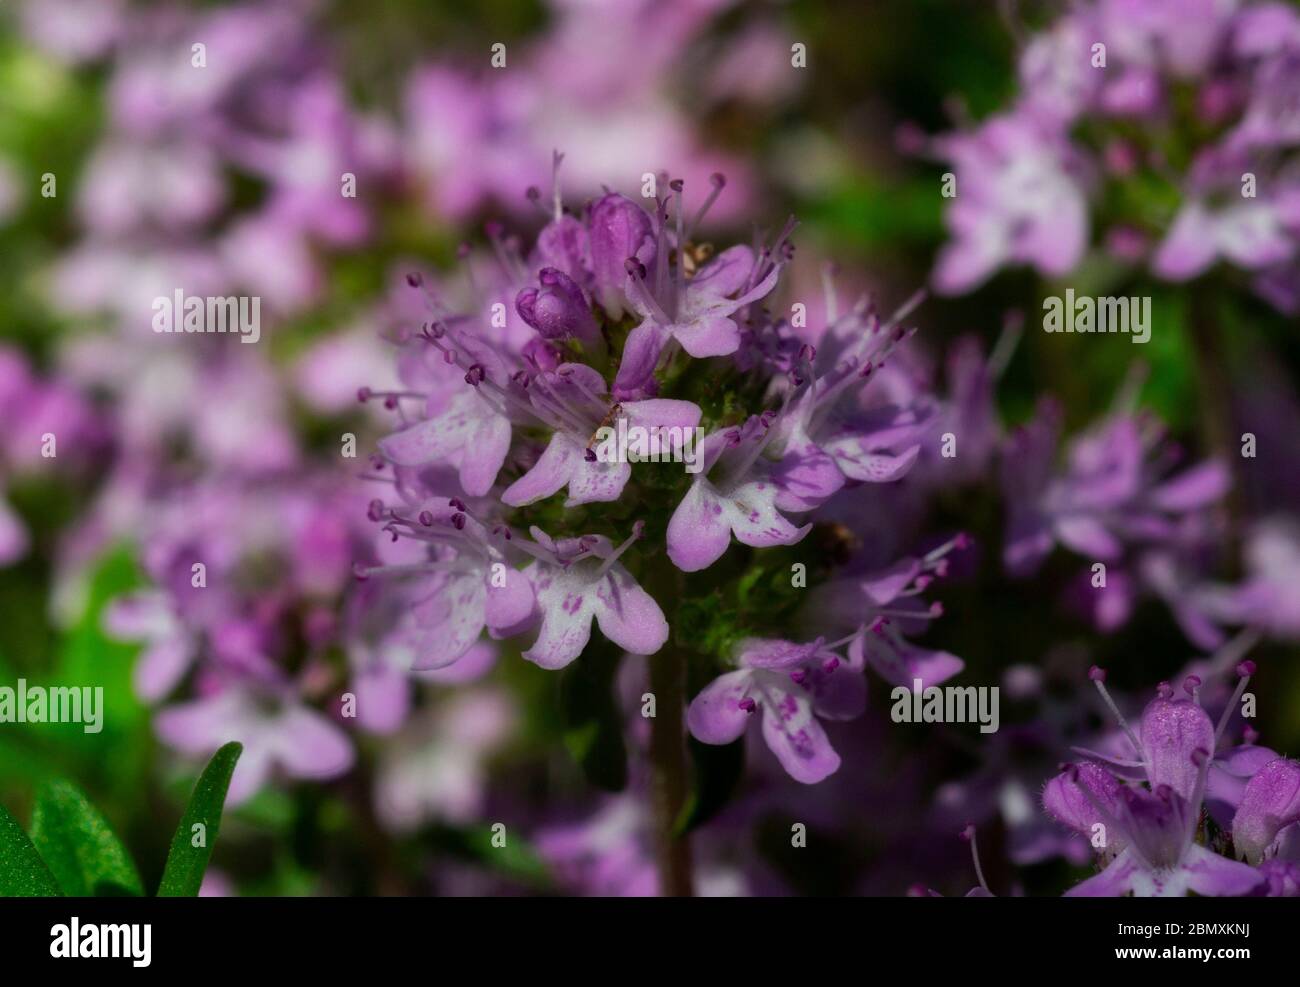 Close-up of Broad-leaved Thyme, Lemon thyme, thymus pulegioides, in bloom on blurred background Stock Photo